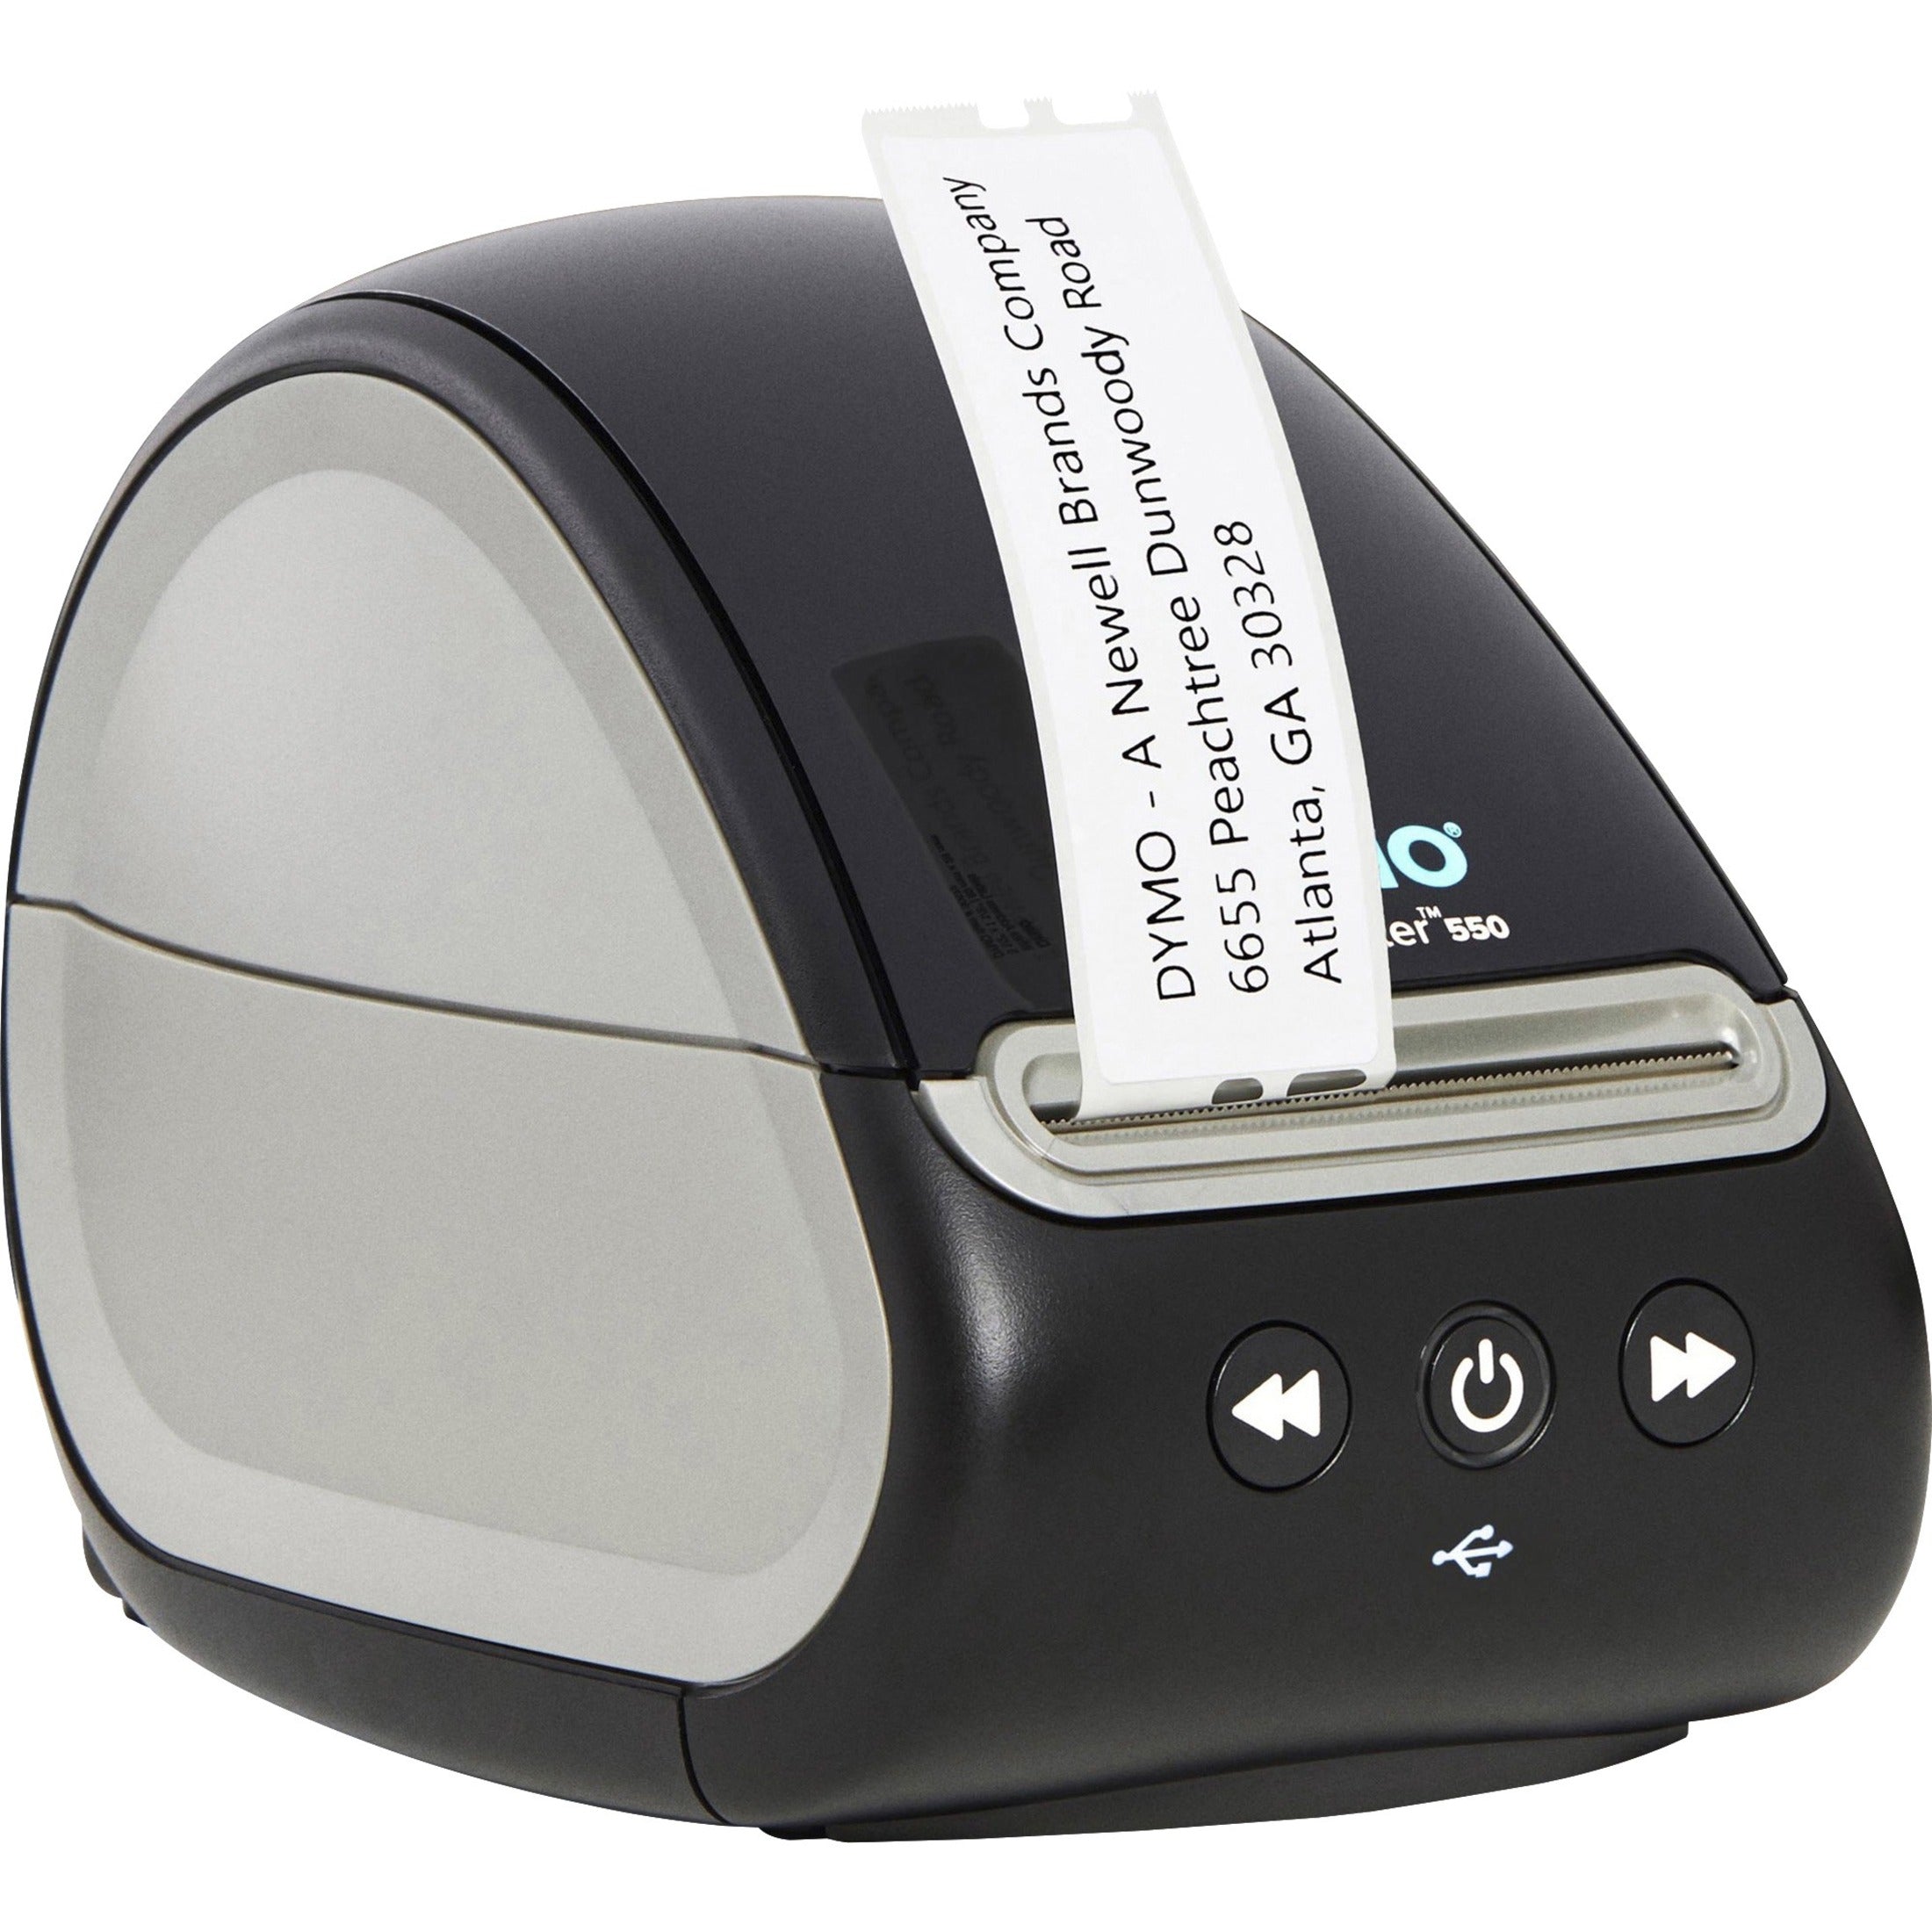 Dymo 2112552 LabelWriter 550 Label Printer, Direct Thermal Printer, 2 Year Warranty, USB and USB Host, Mac and PC Compatible